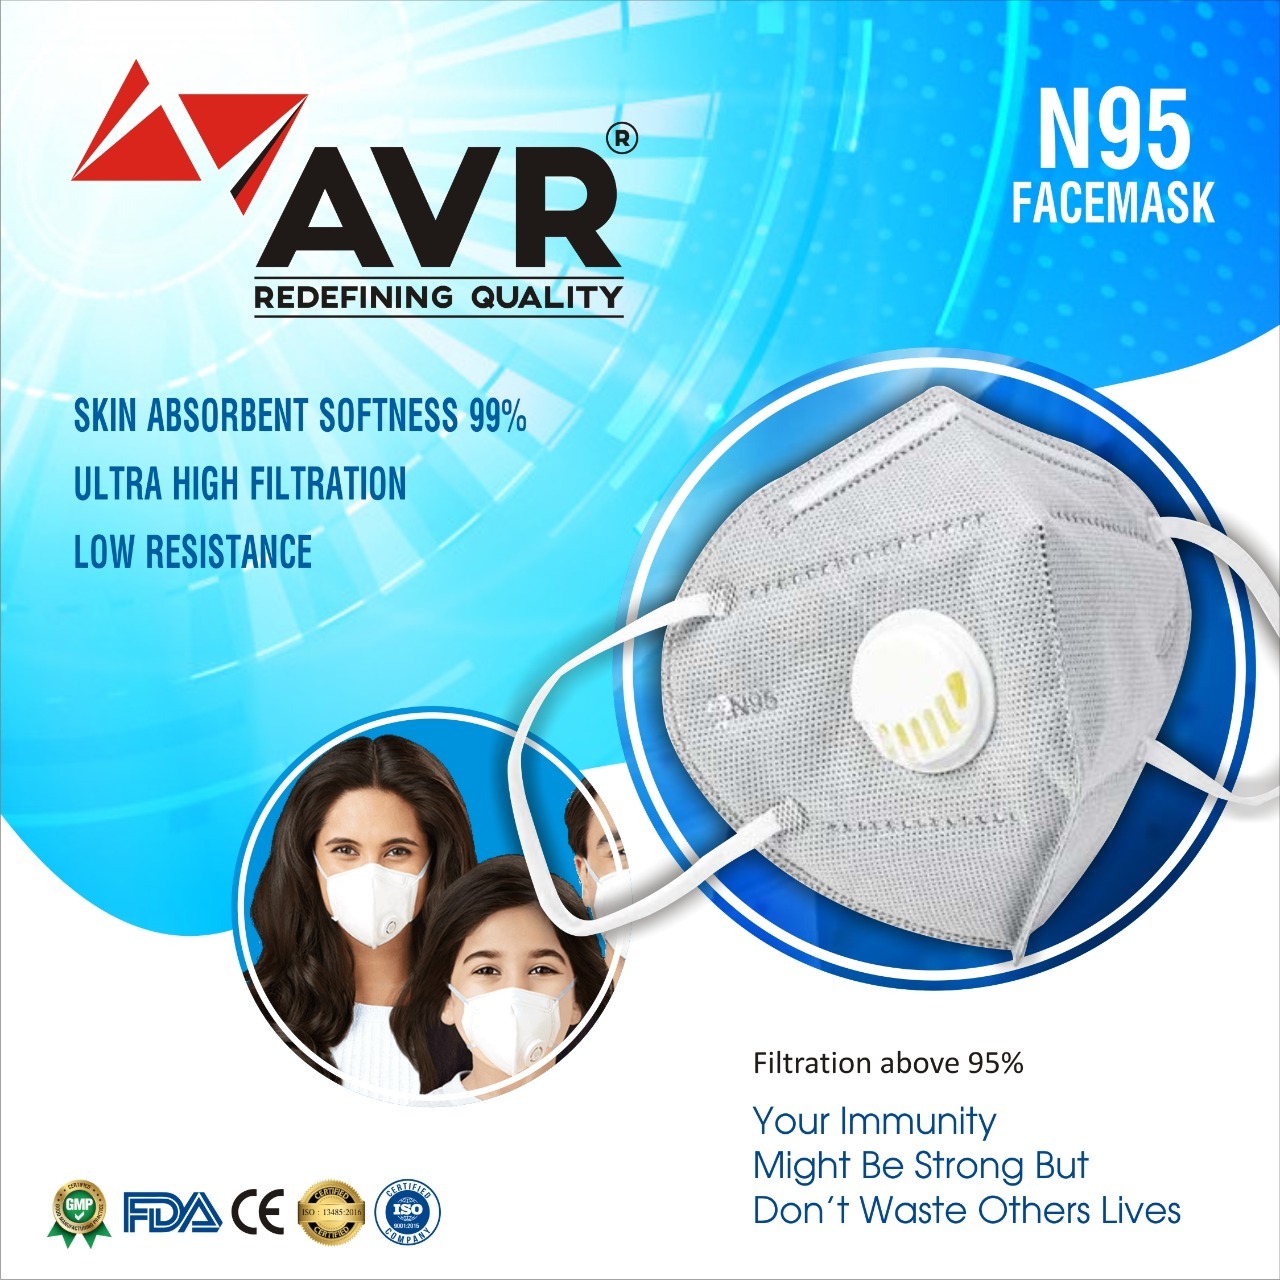 N95 Face Mask with Respirator - 6 Layer